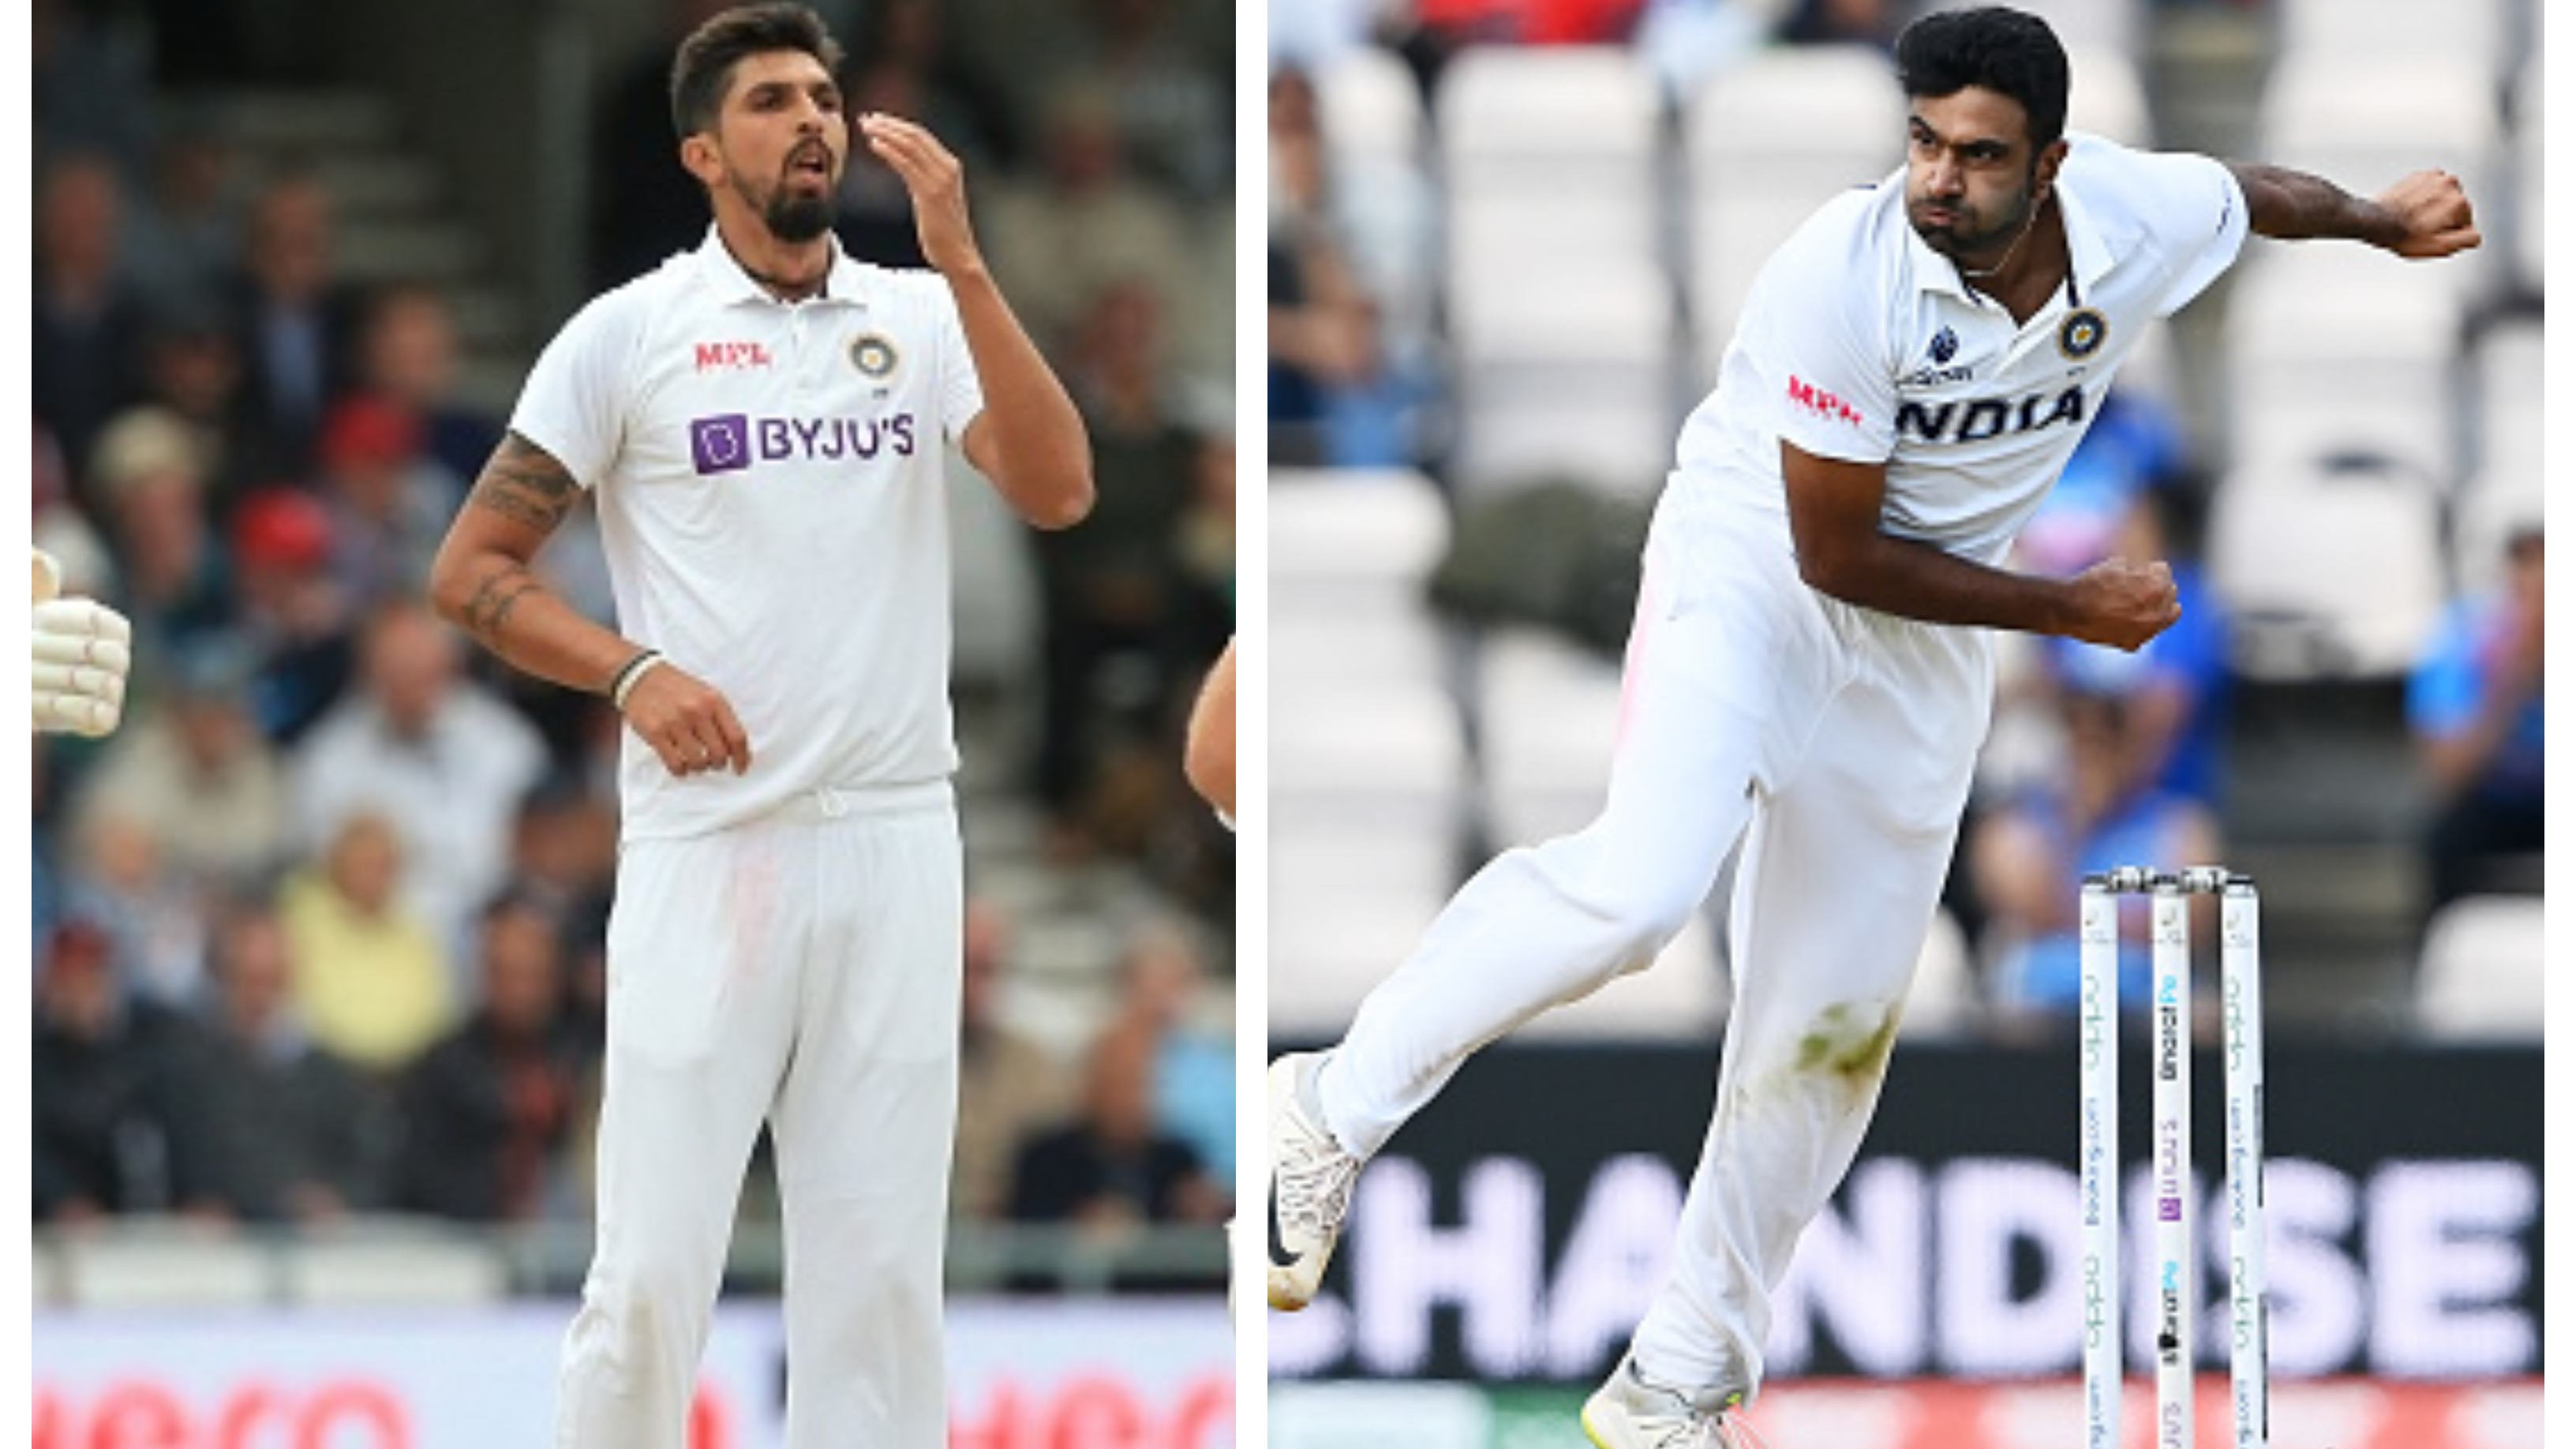 ENG v IND 2021: Ishant Sharma likely to be axed from the Oval Test, R Ashwin may get his first game – Report